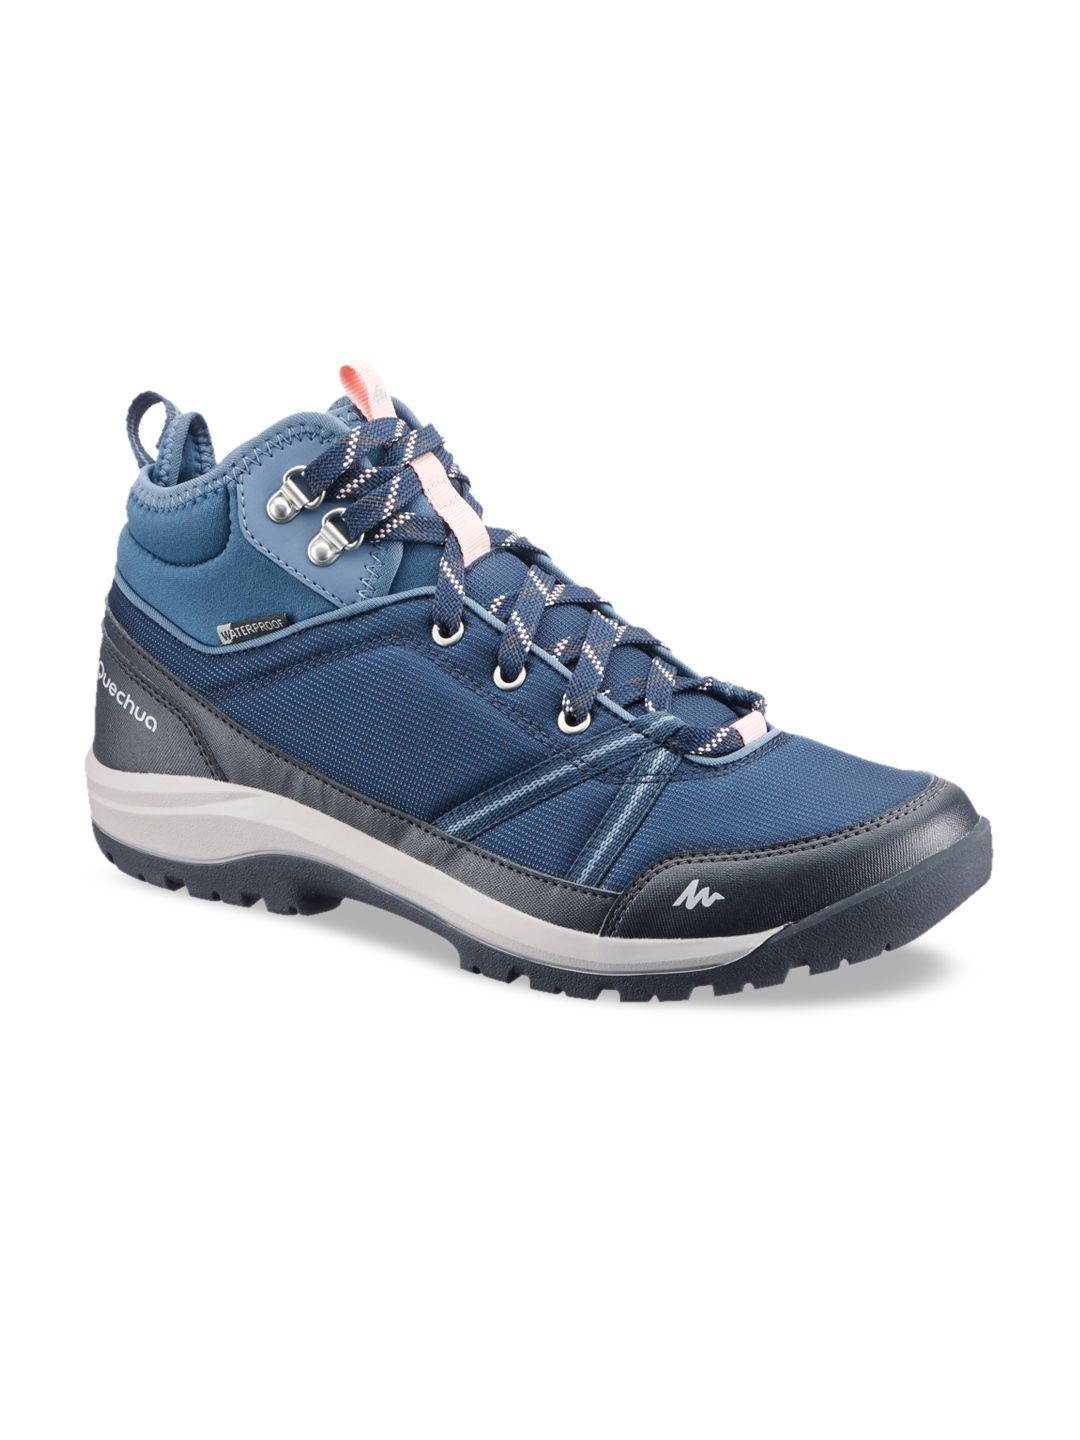 Quechua By Decathlon Women Blue Waterproof Hiking Shoes NH150 Price in India